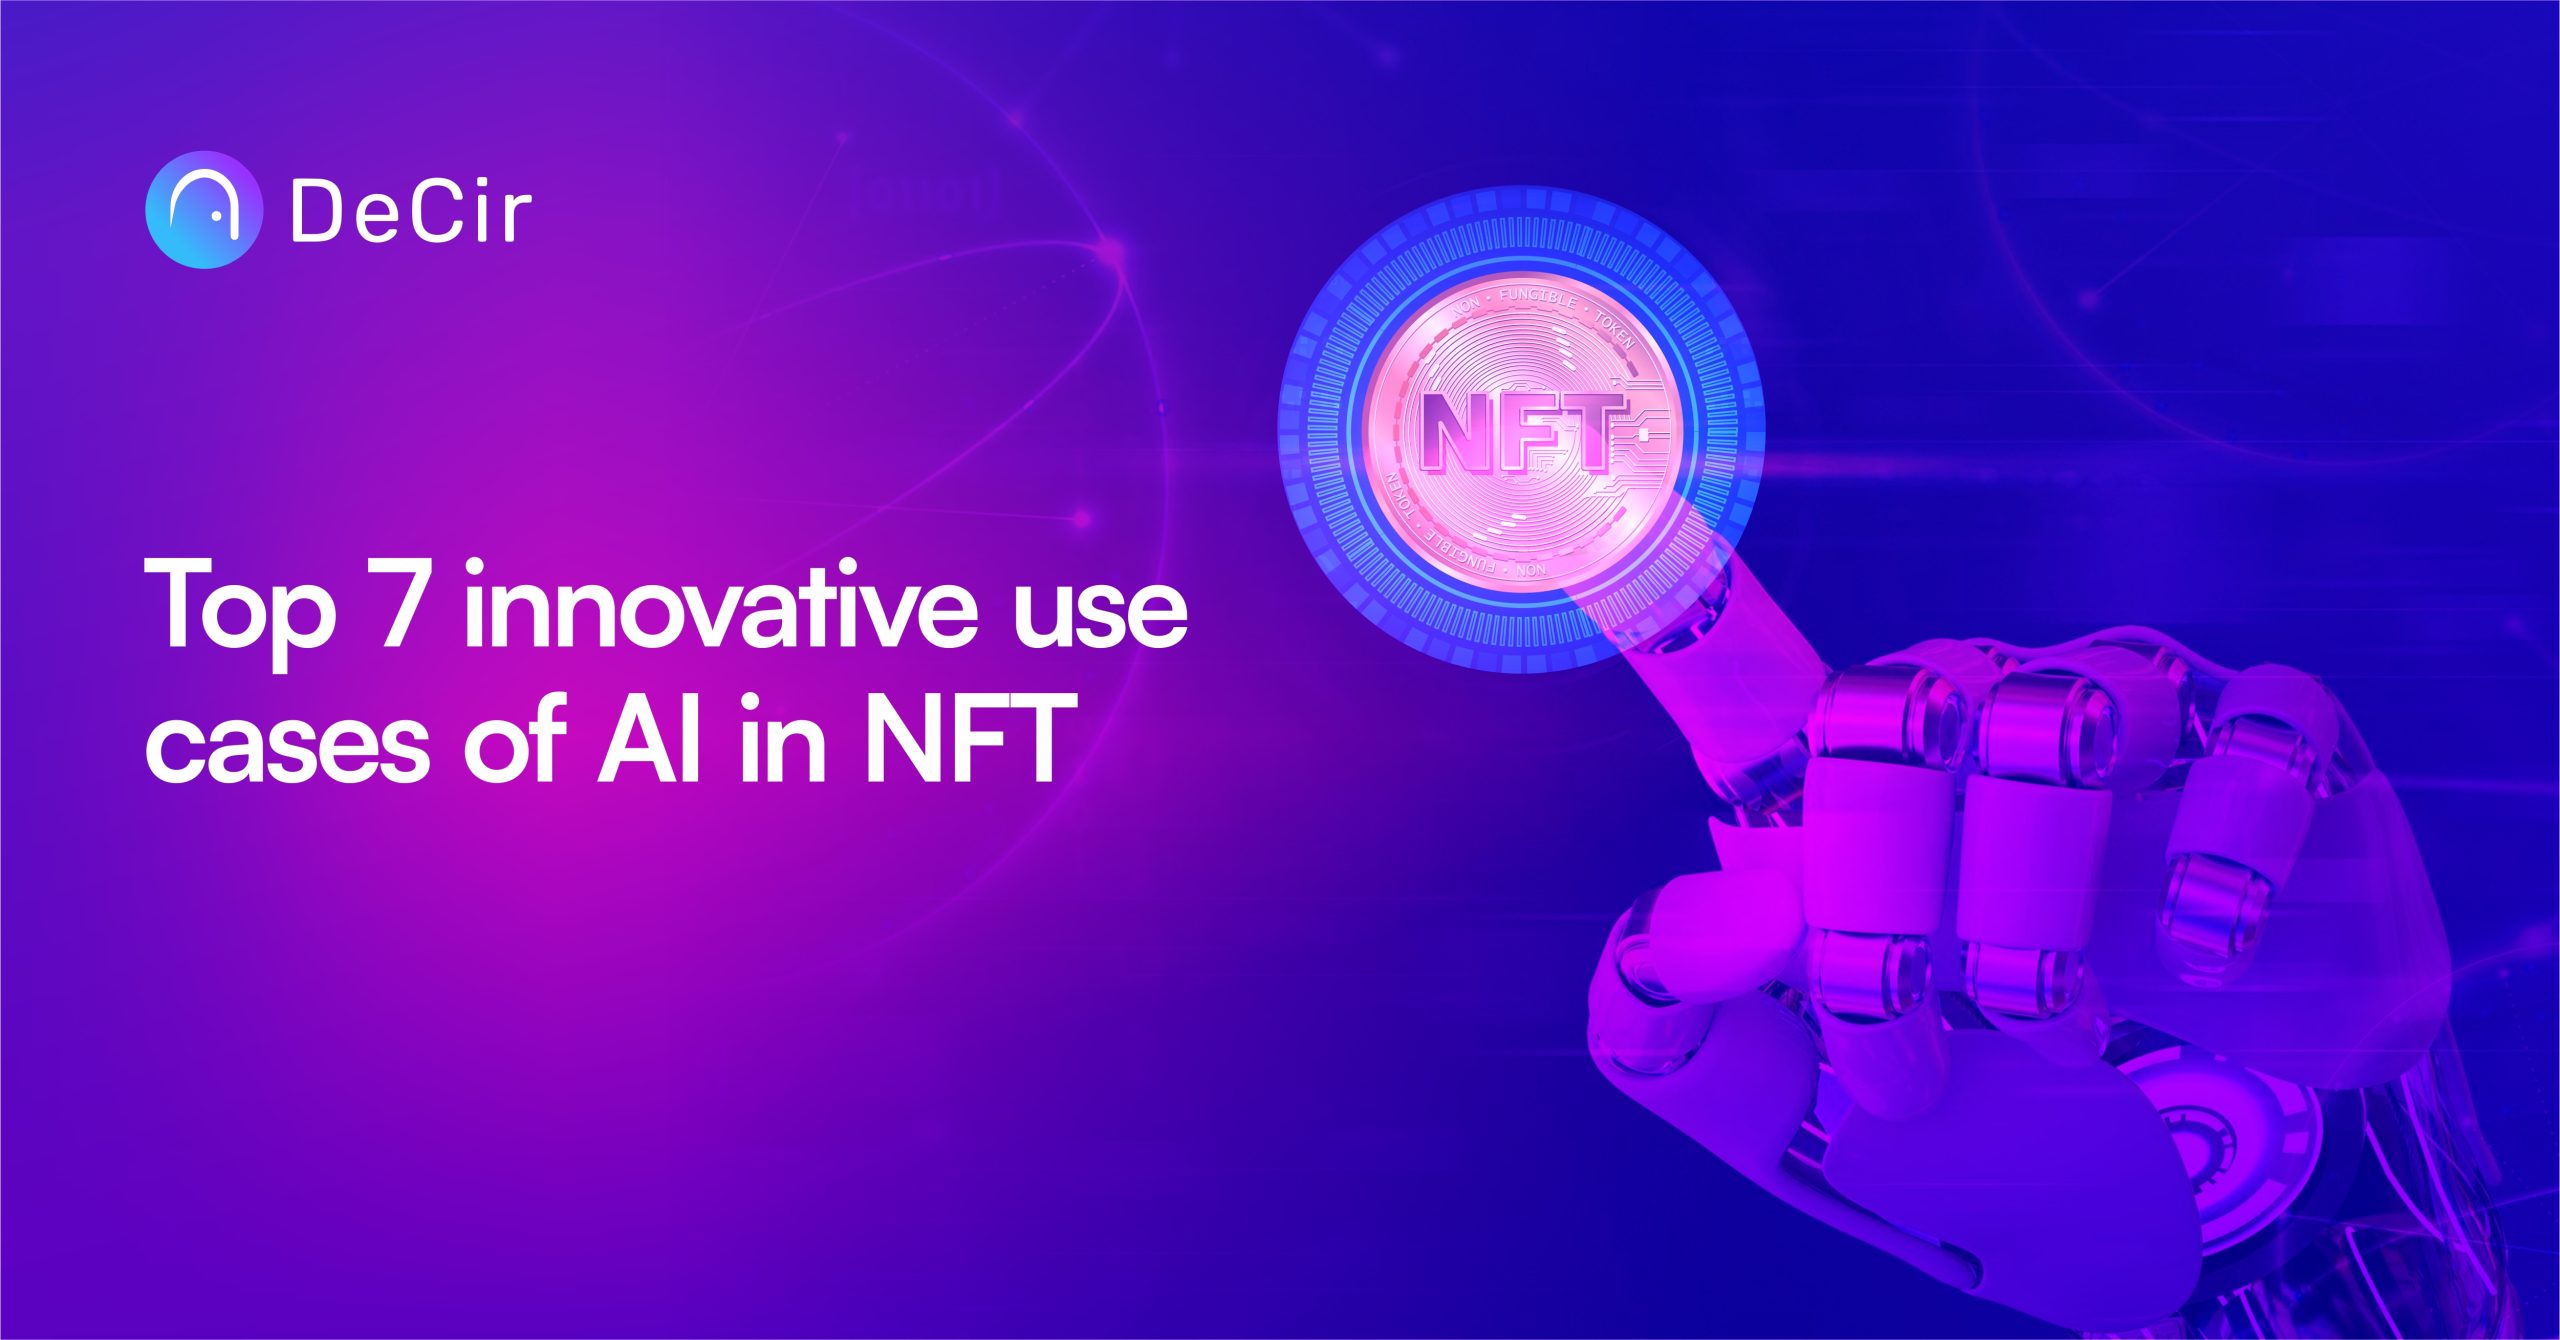 Top 7 innovative use cases of AI in NFT